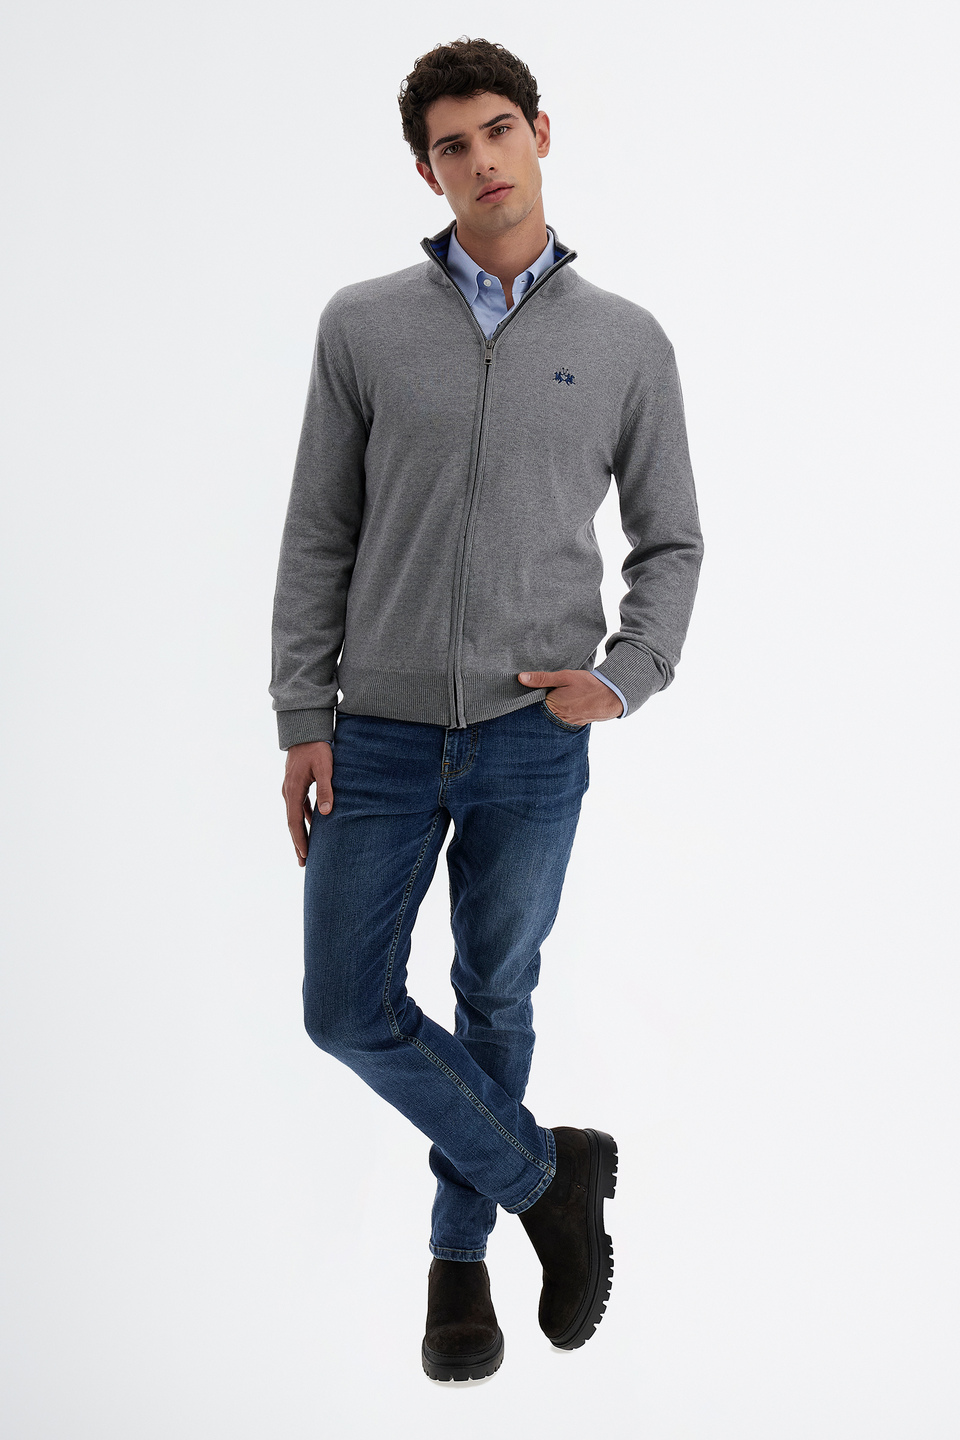 Wool sweater Essential high neck and regular fit zip | La Martina - Official Online Shop